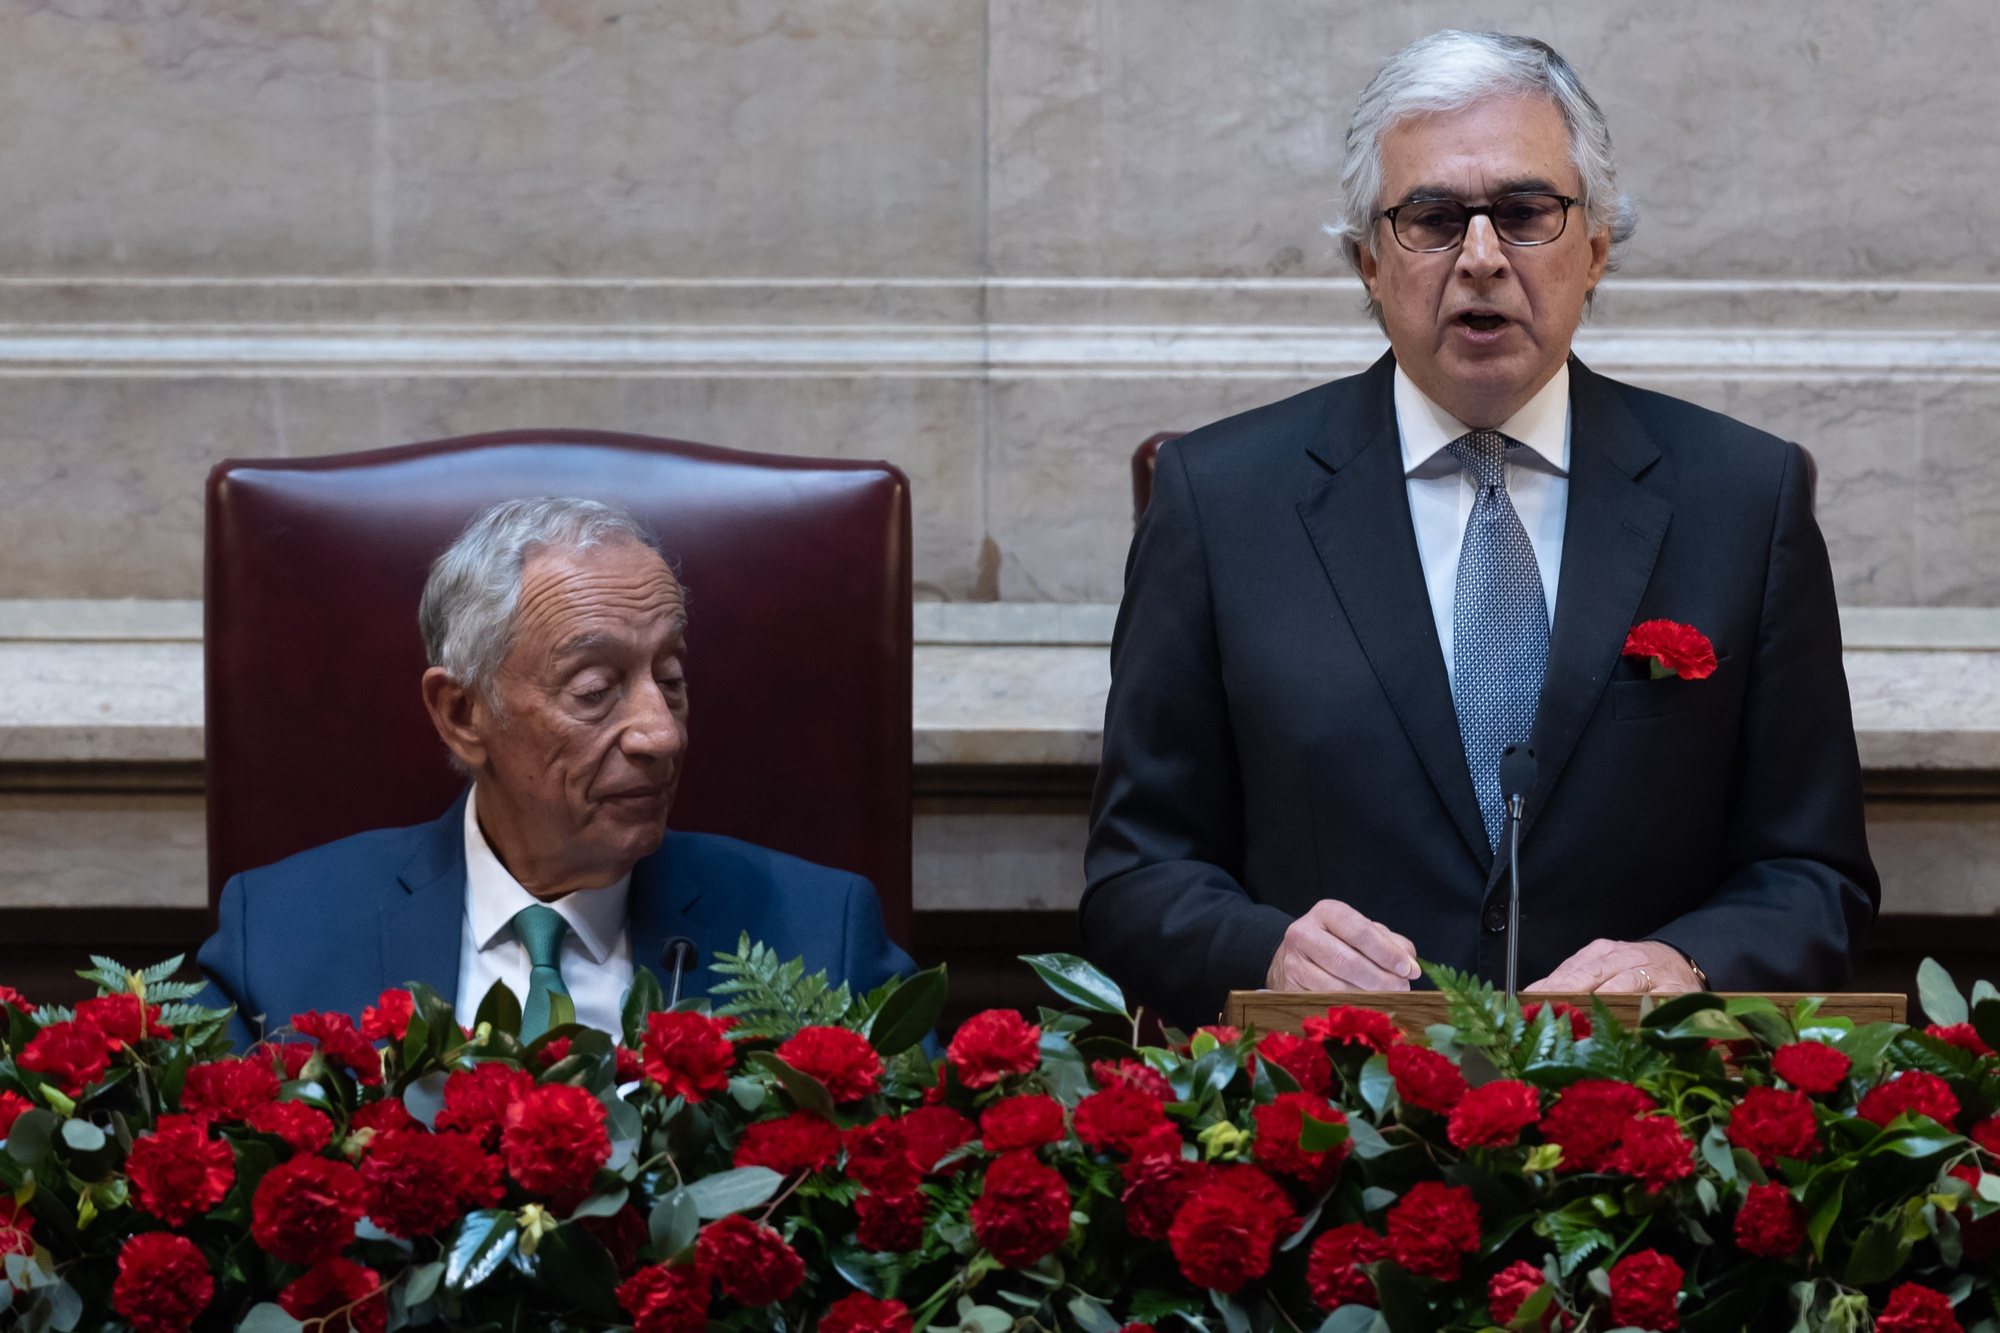 Portuguese president of the parliament, Jose Pedro Aguiar Branco, flanked by the Portuguese President, Marcelo Rebelo de Sousa, delivers a speech during the solemn comemorative session at the Portuguese parliament in Lisbon, Portugal, 25 April 2024. Portugal celebrates the 50th anniversary of the Carnation Revolution that ended the authoritarian regime of Estado Novo (New State) that ruled the country between 1926 to 1974. JOSE SENA GOULAO/LUSA